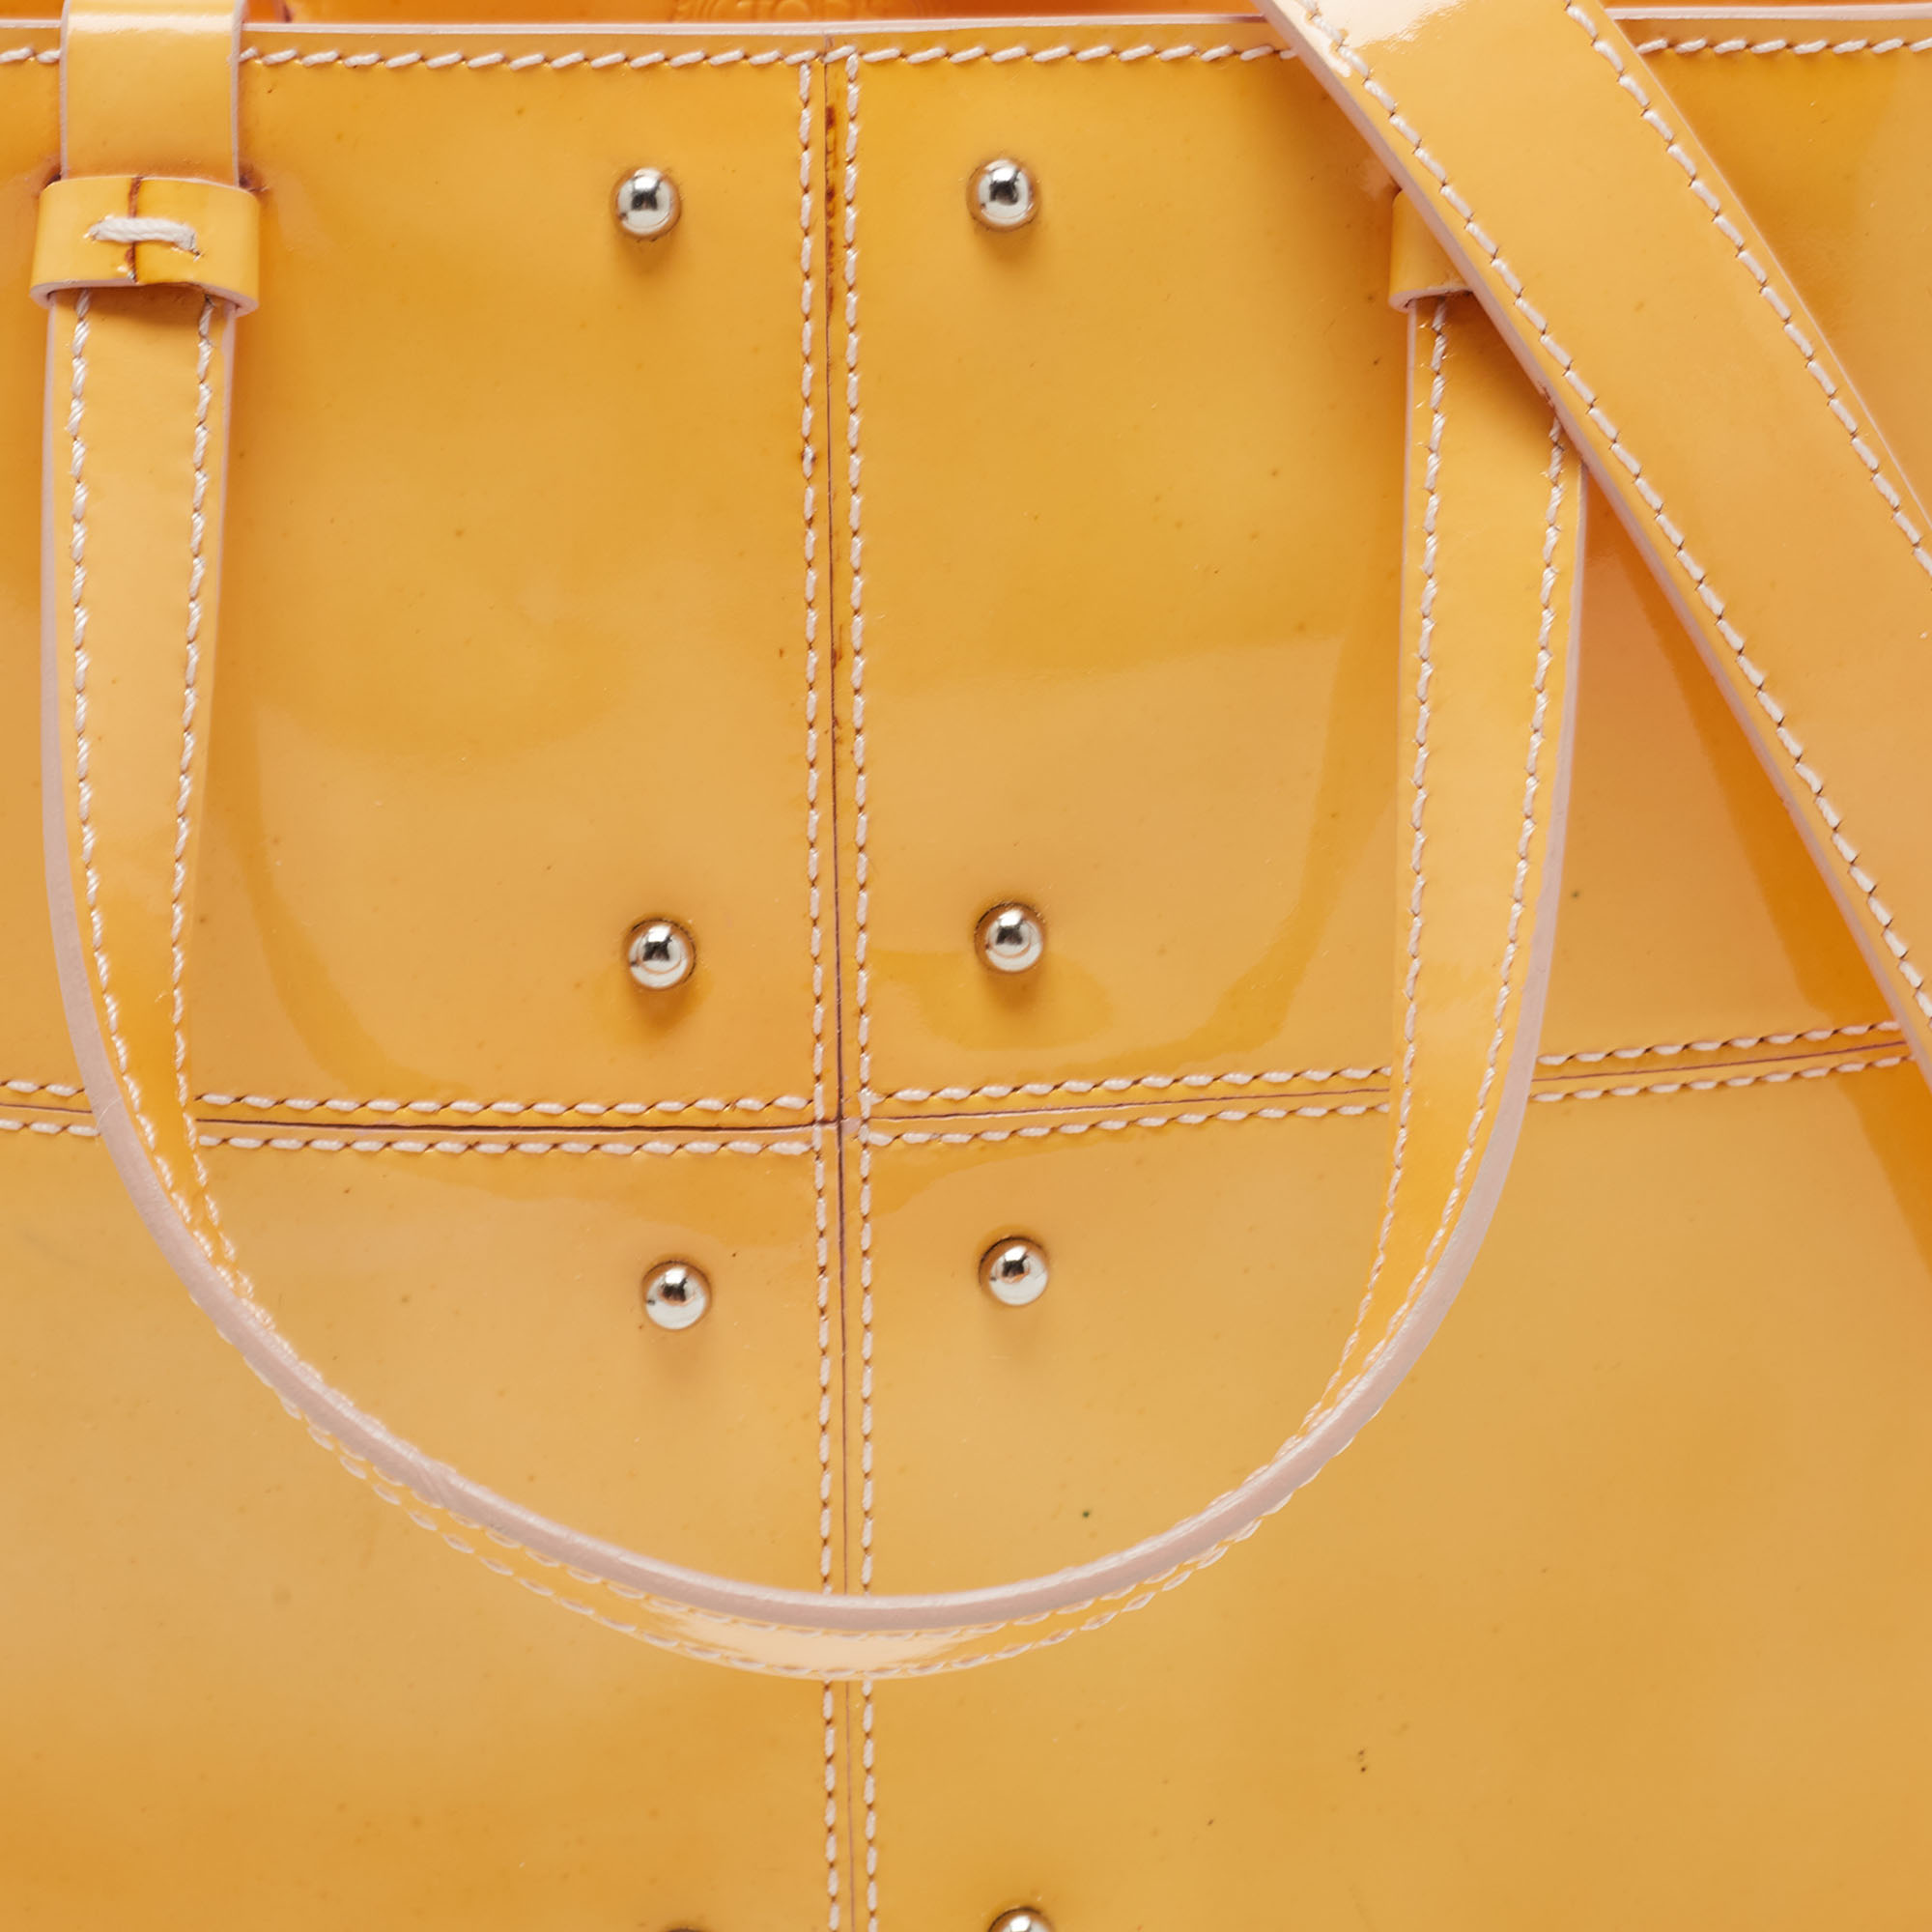 Tod's Yellow Studded Patent Leather Mini Tote